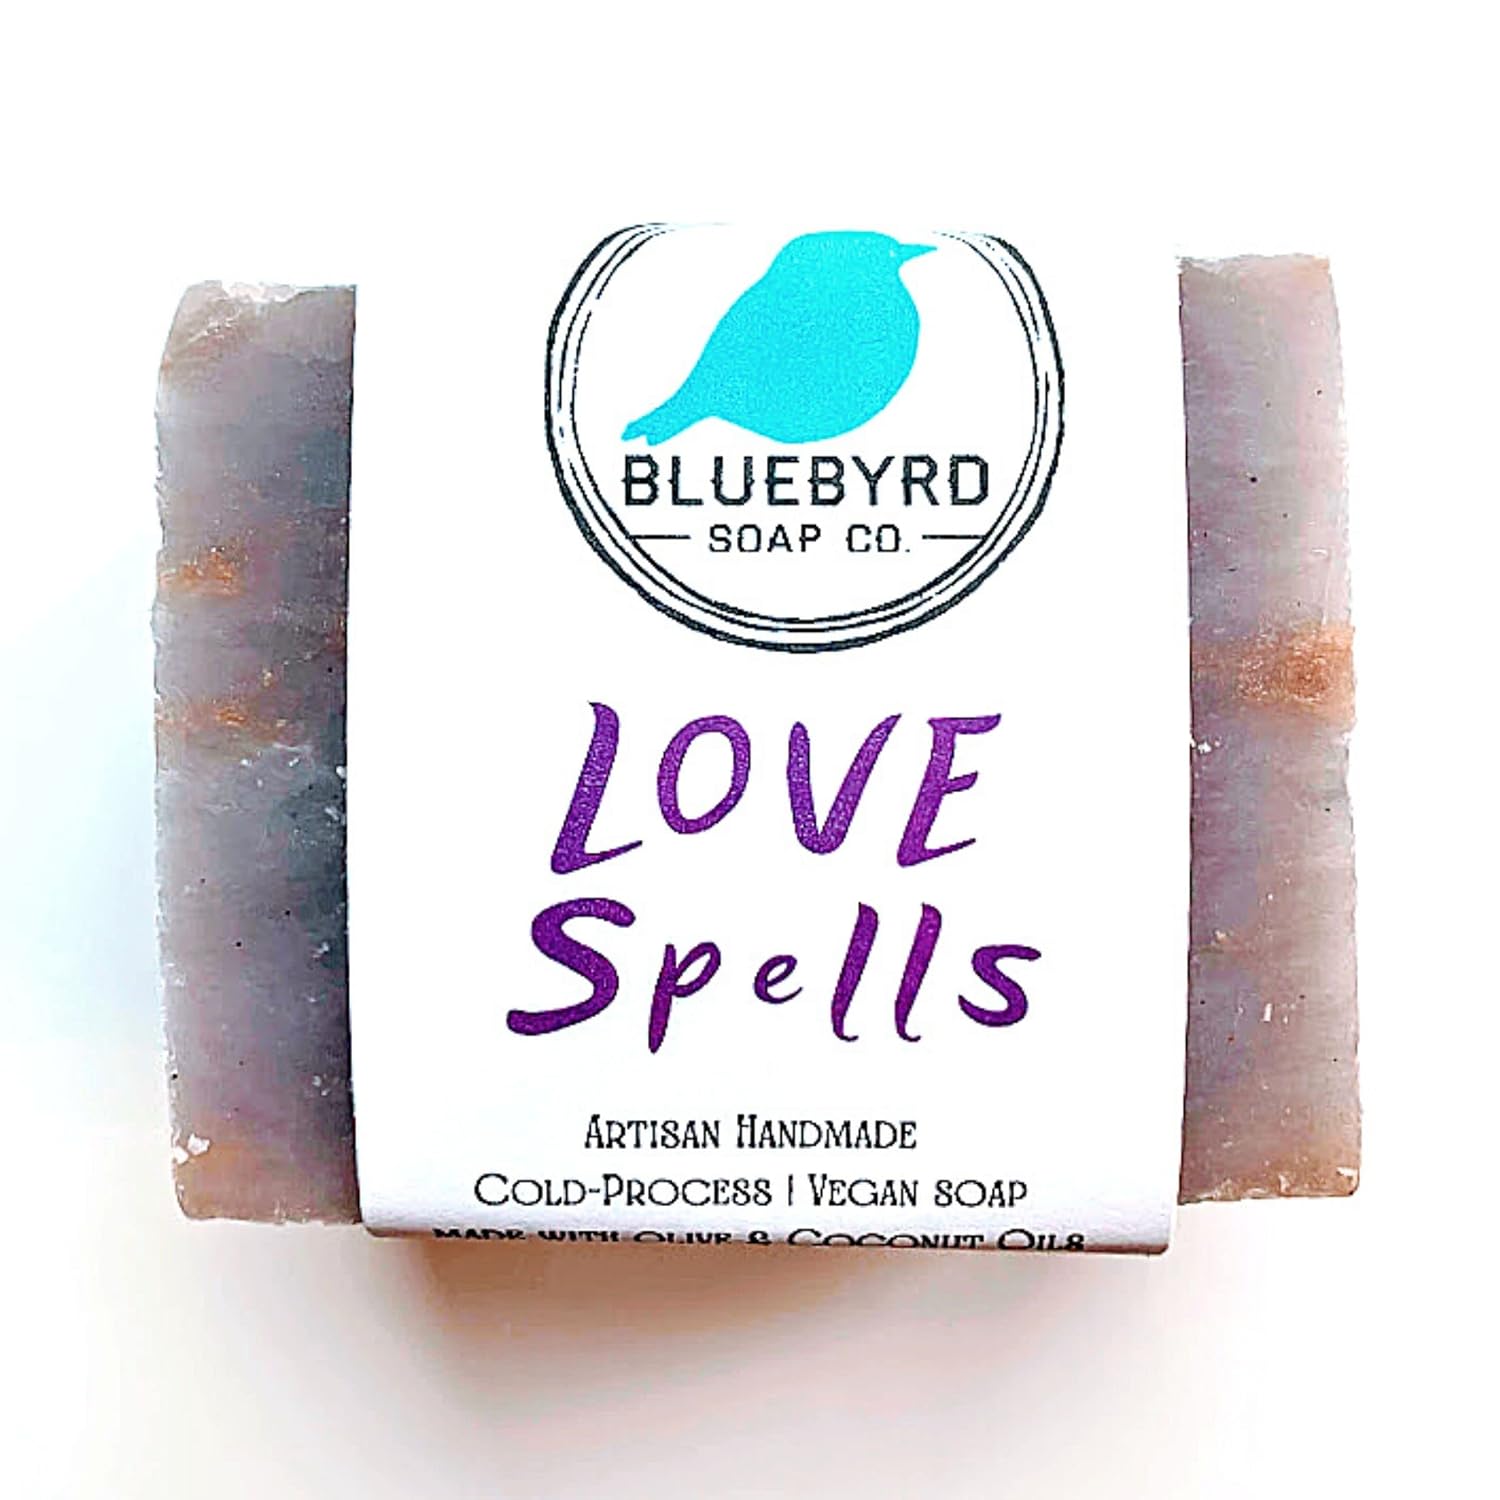 BLUEBYRD Soap Co. Lovespell Women’s Scented Soap Bar | Sweet Fruity & oral Scented Soap for Women | Quality Handmade Artisanal Hand & Body Wash for Women | Vegan Soap Made with Kaolin Clay for Oily Skin, Acne, & Damaged Skin Repair (LOVE)